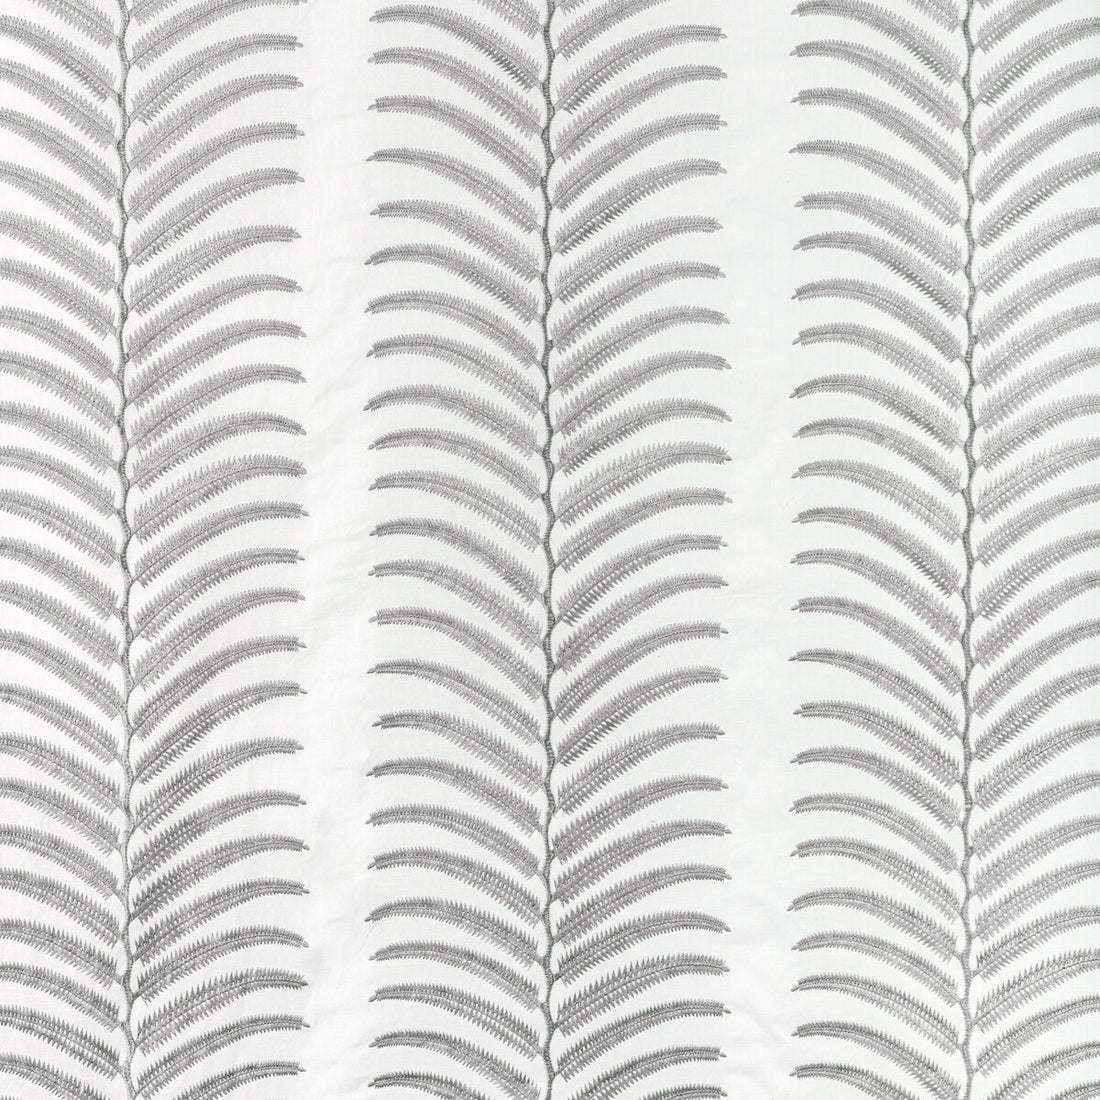 Plantae fabric in platinum color - pattern 36344.11.0 - by Kravet Couture in the Modern Luxe III collection